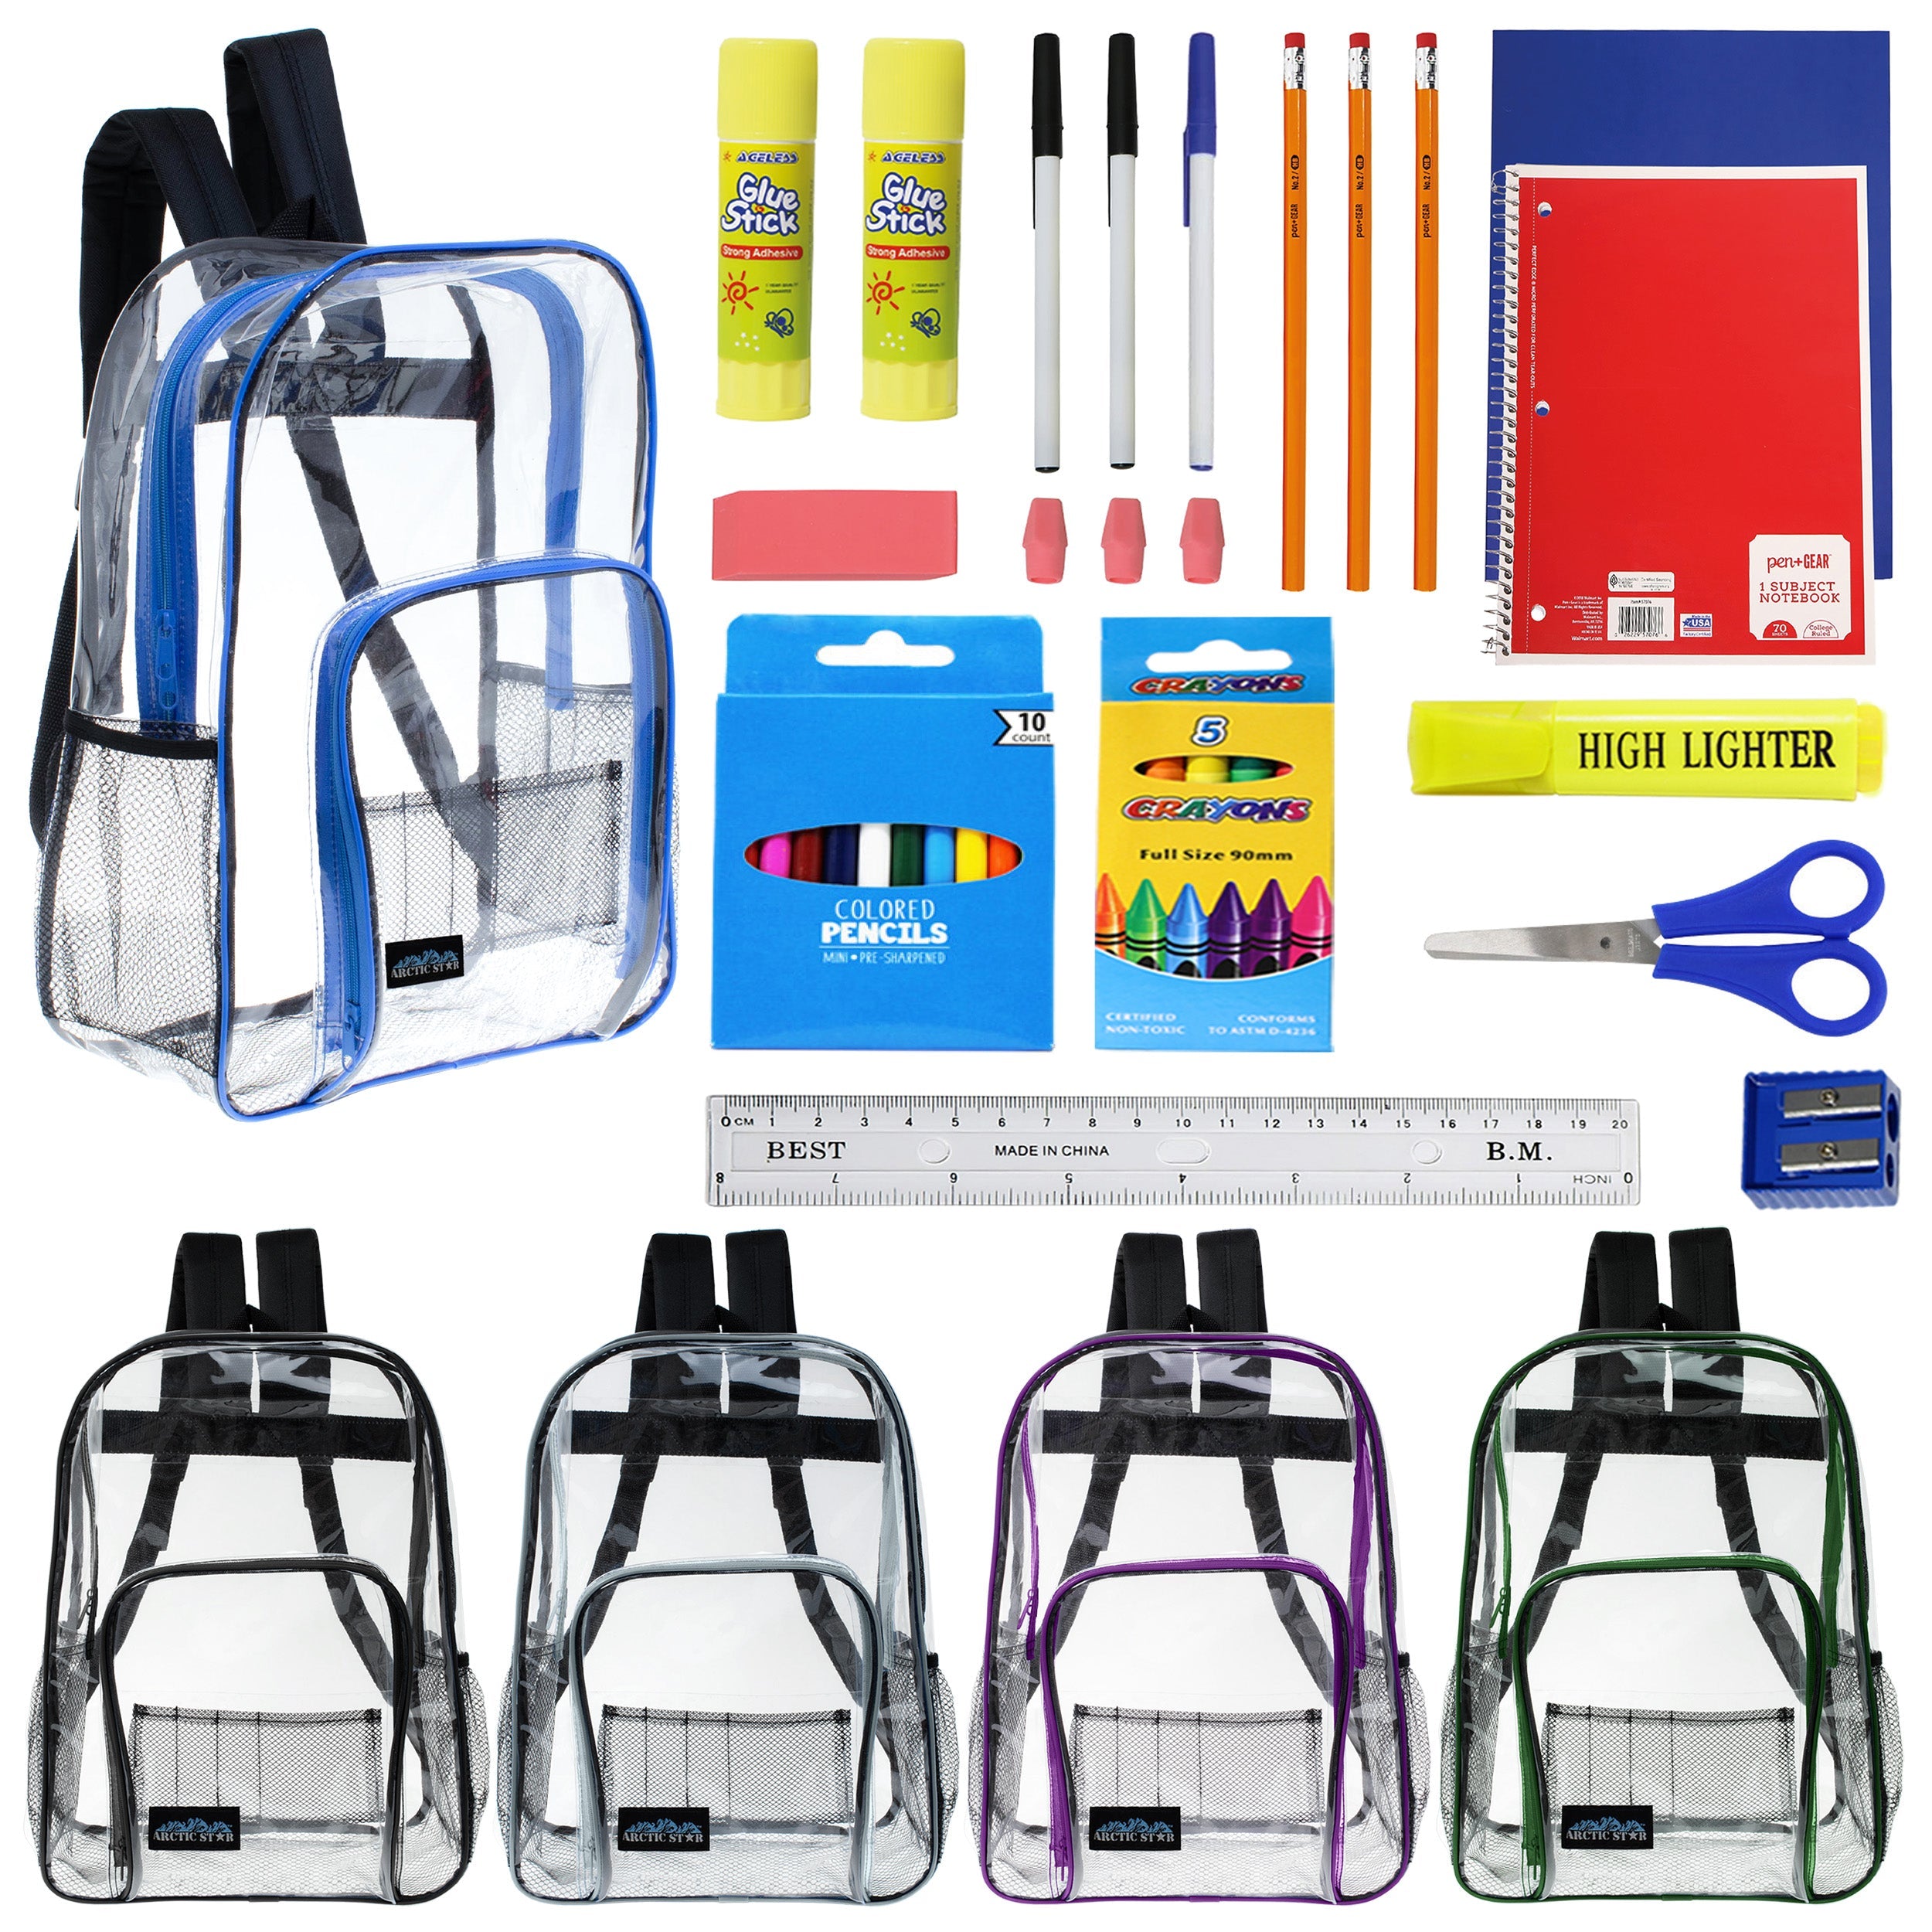 12 Wholesale 13" Clear Backpacks in Assorted Colors and 12 Bulk School Supply Kits of Your Choice